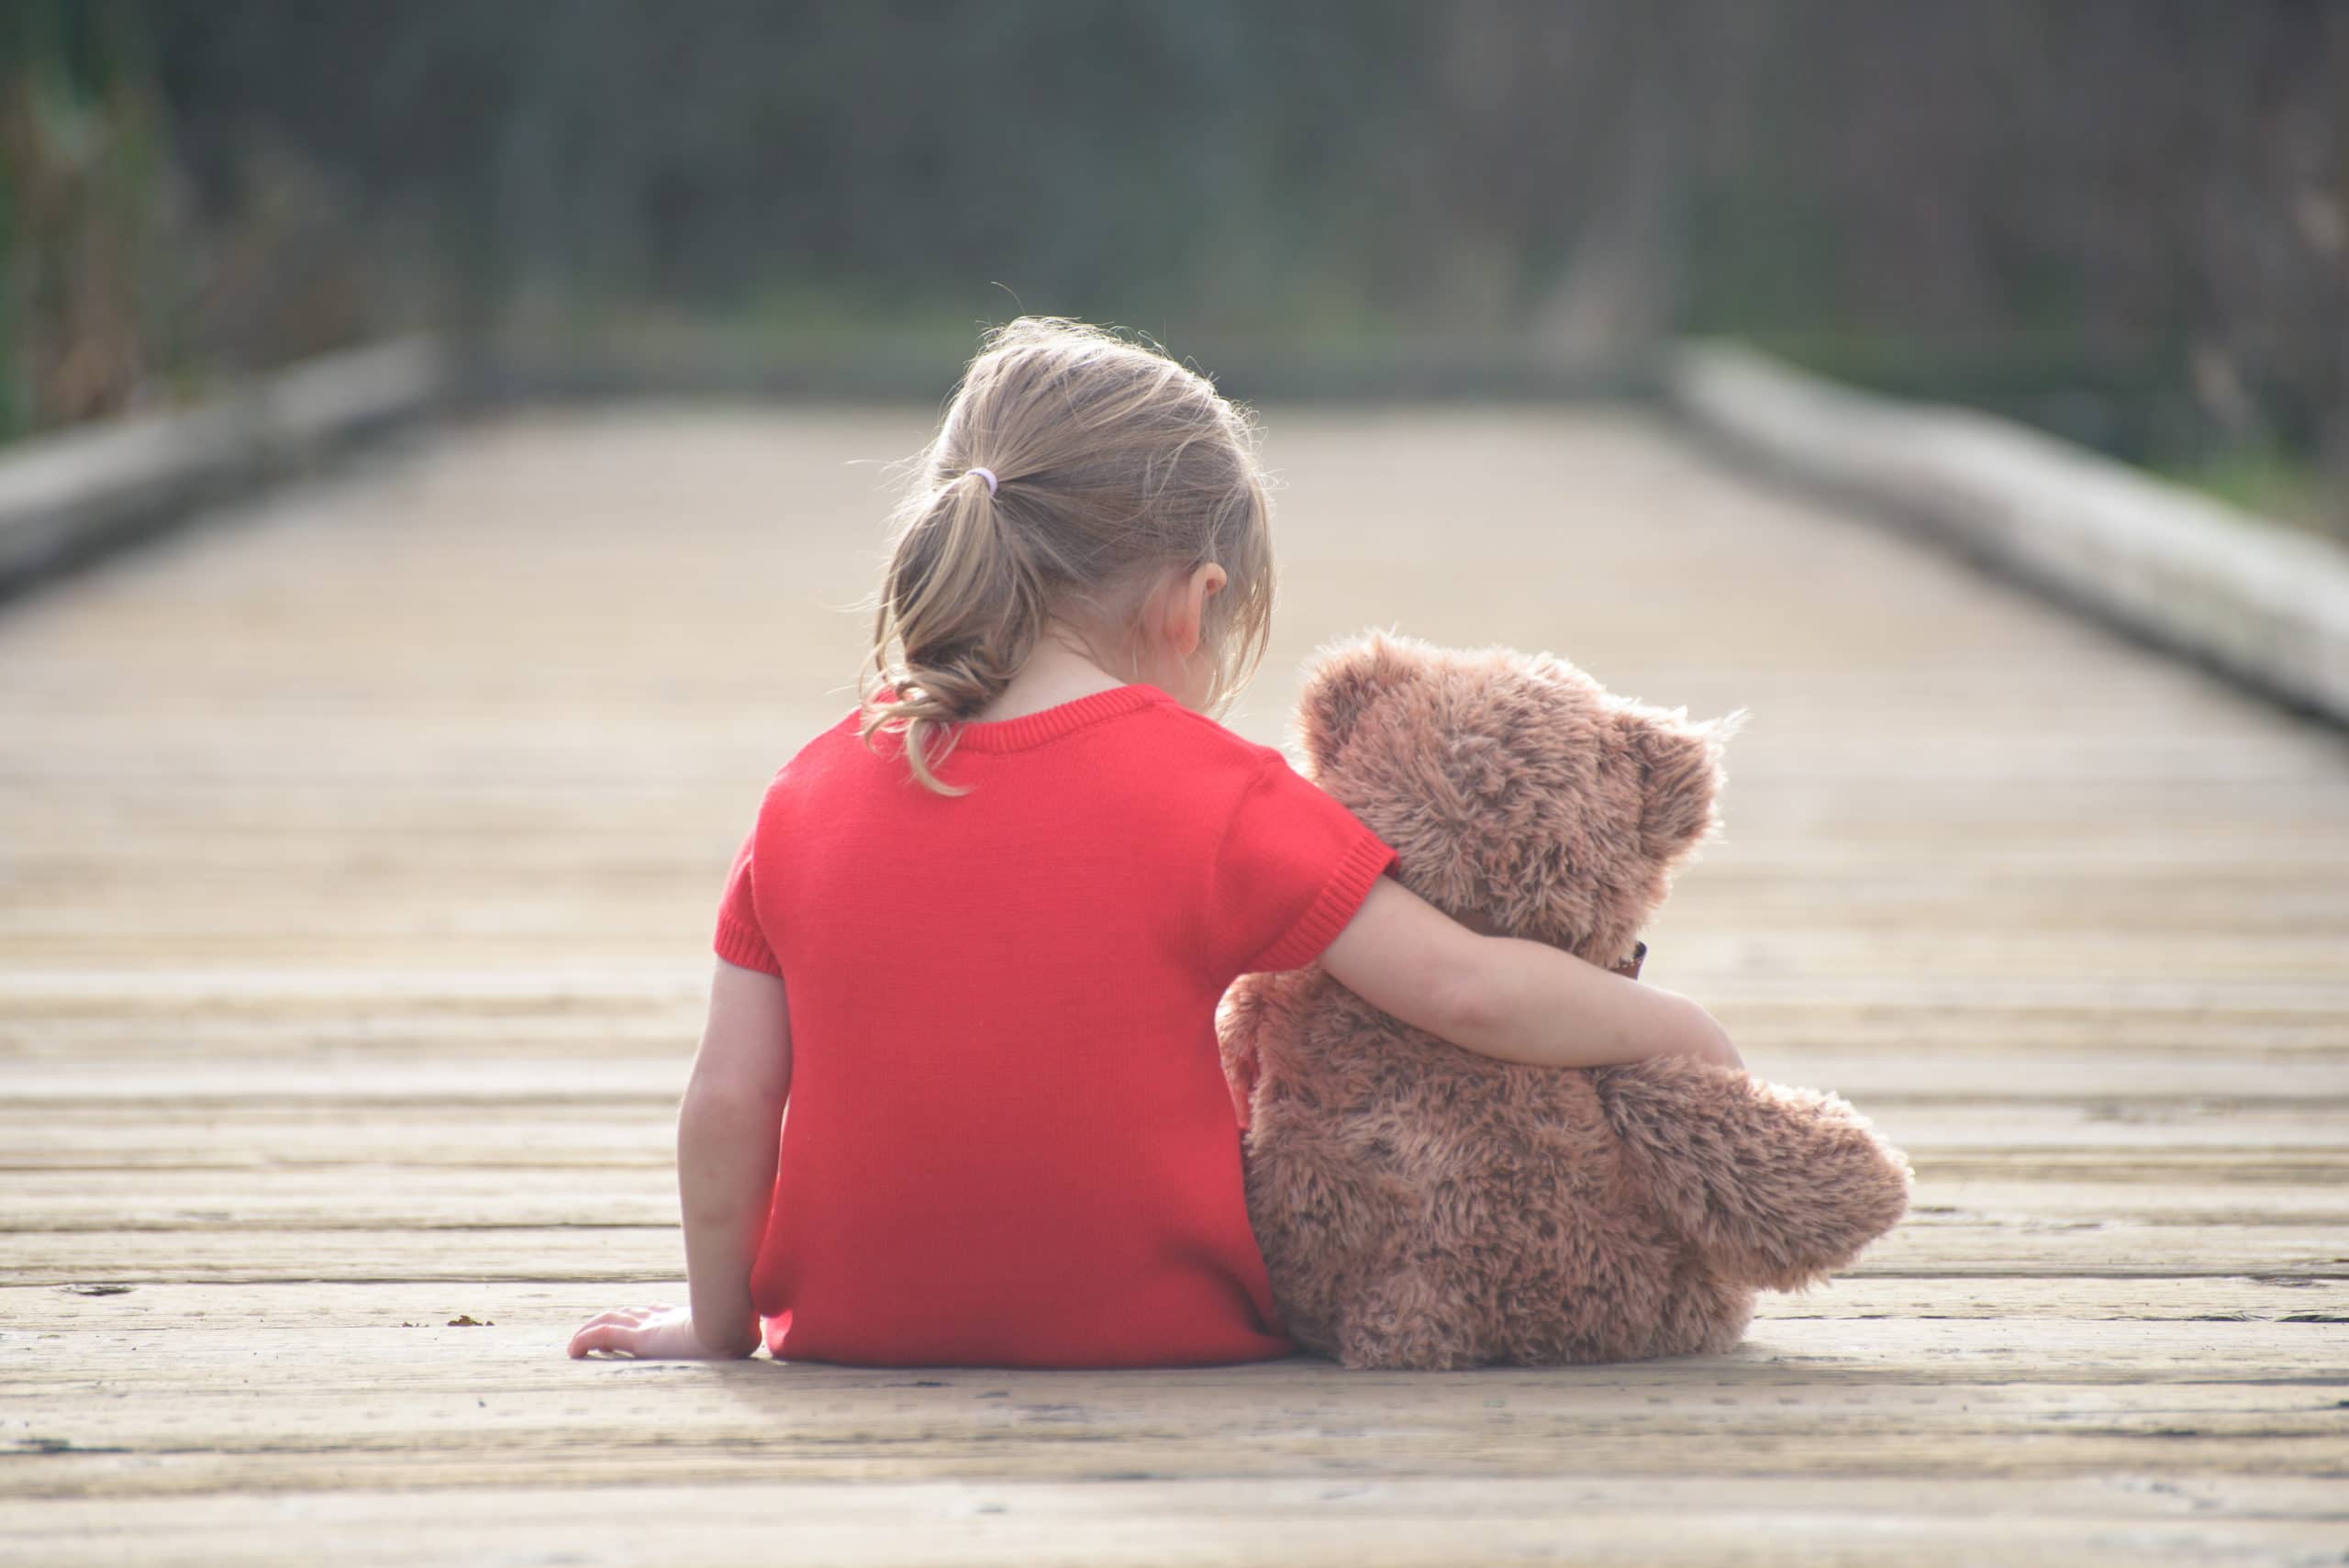 Supporting Foster Children When You Can’t be a Foster Parent